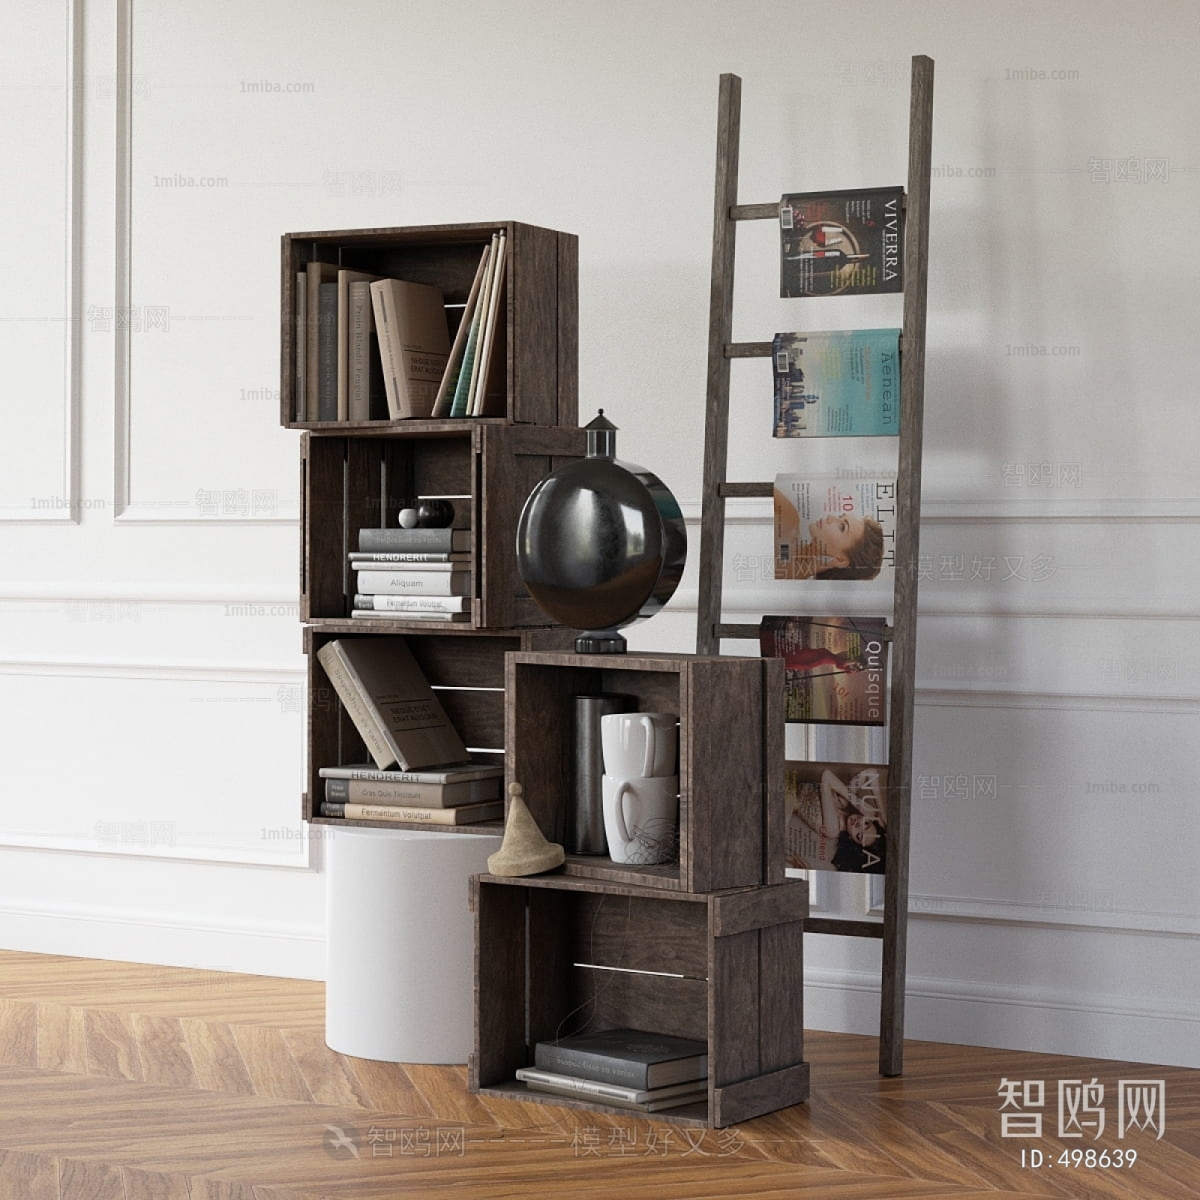 Country Style Shelving